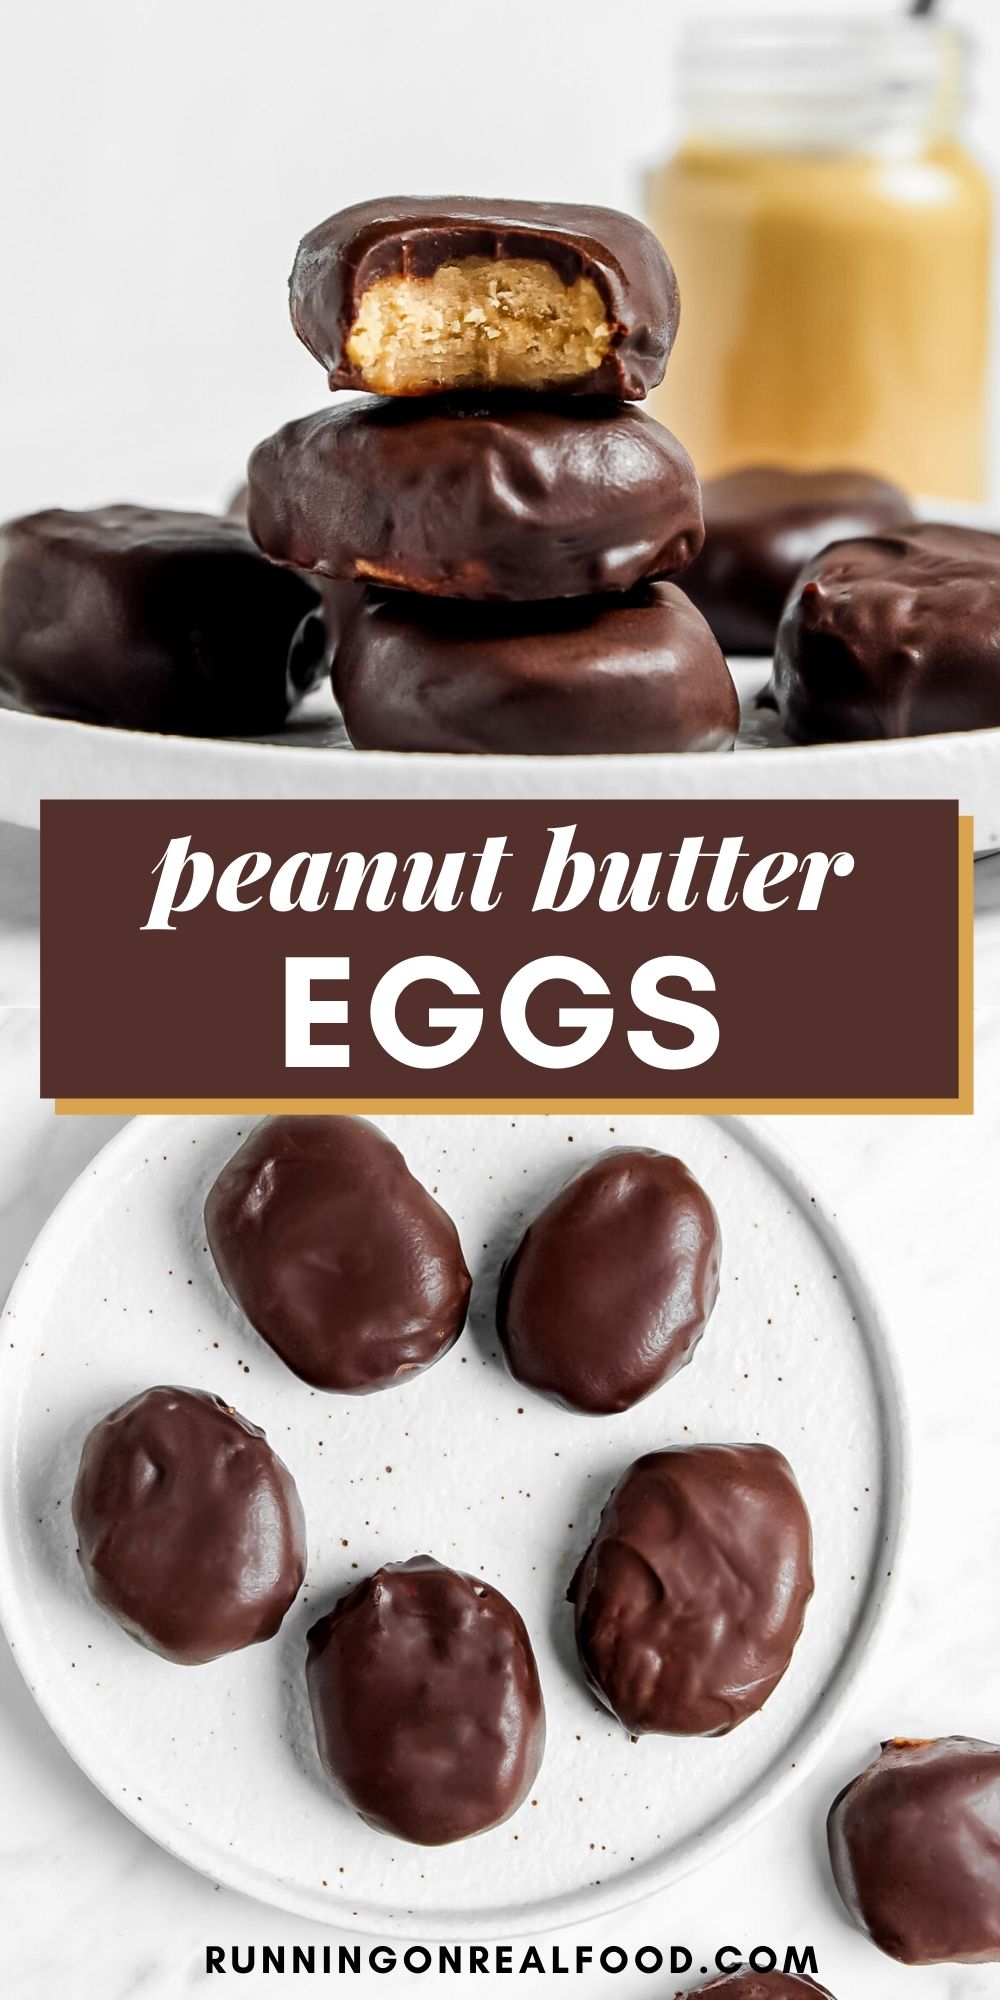 Pinterest graphic with an image and text for a vegan peanut butter egg recipe.